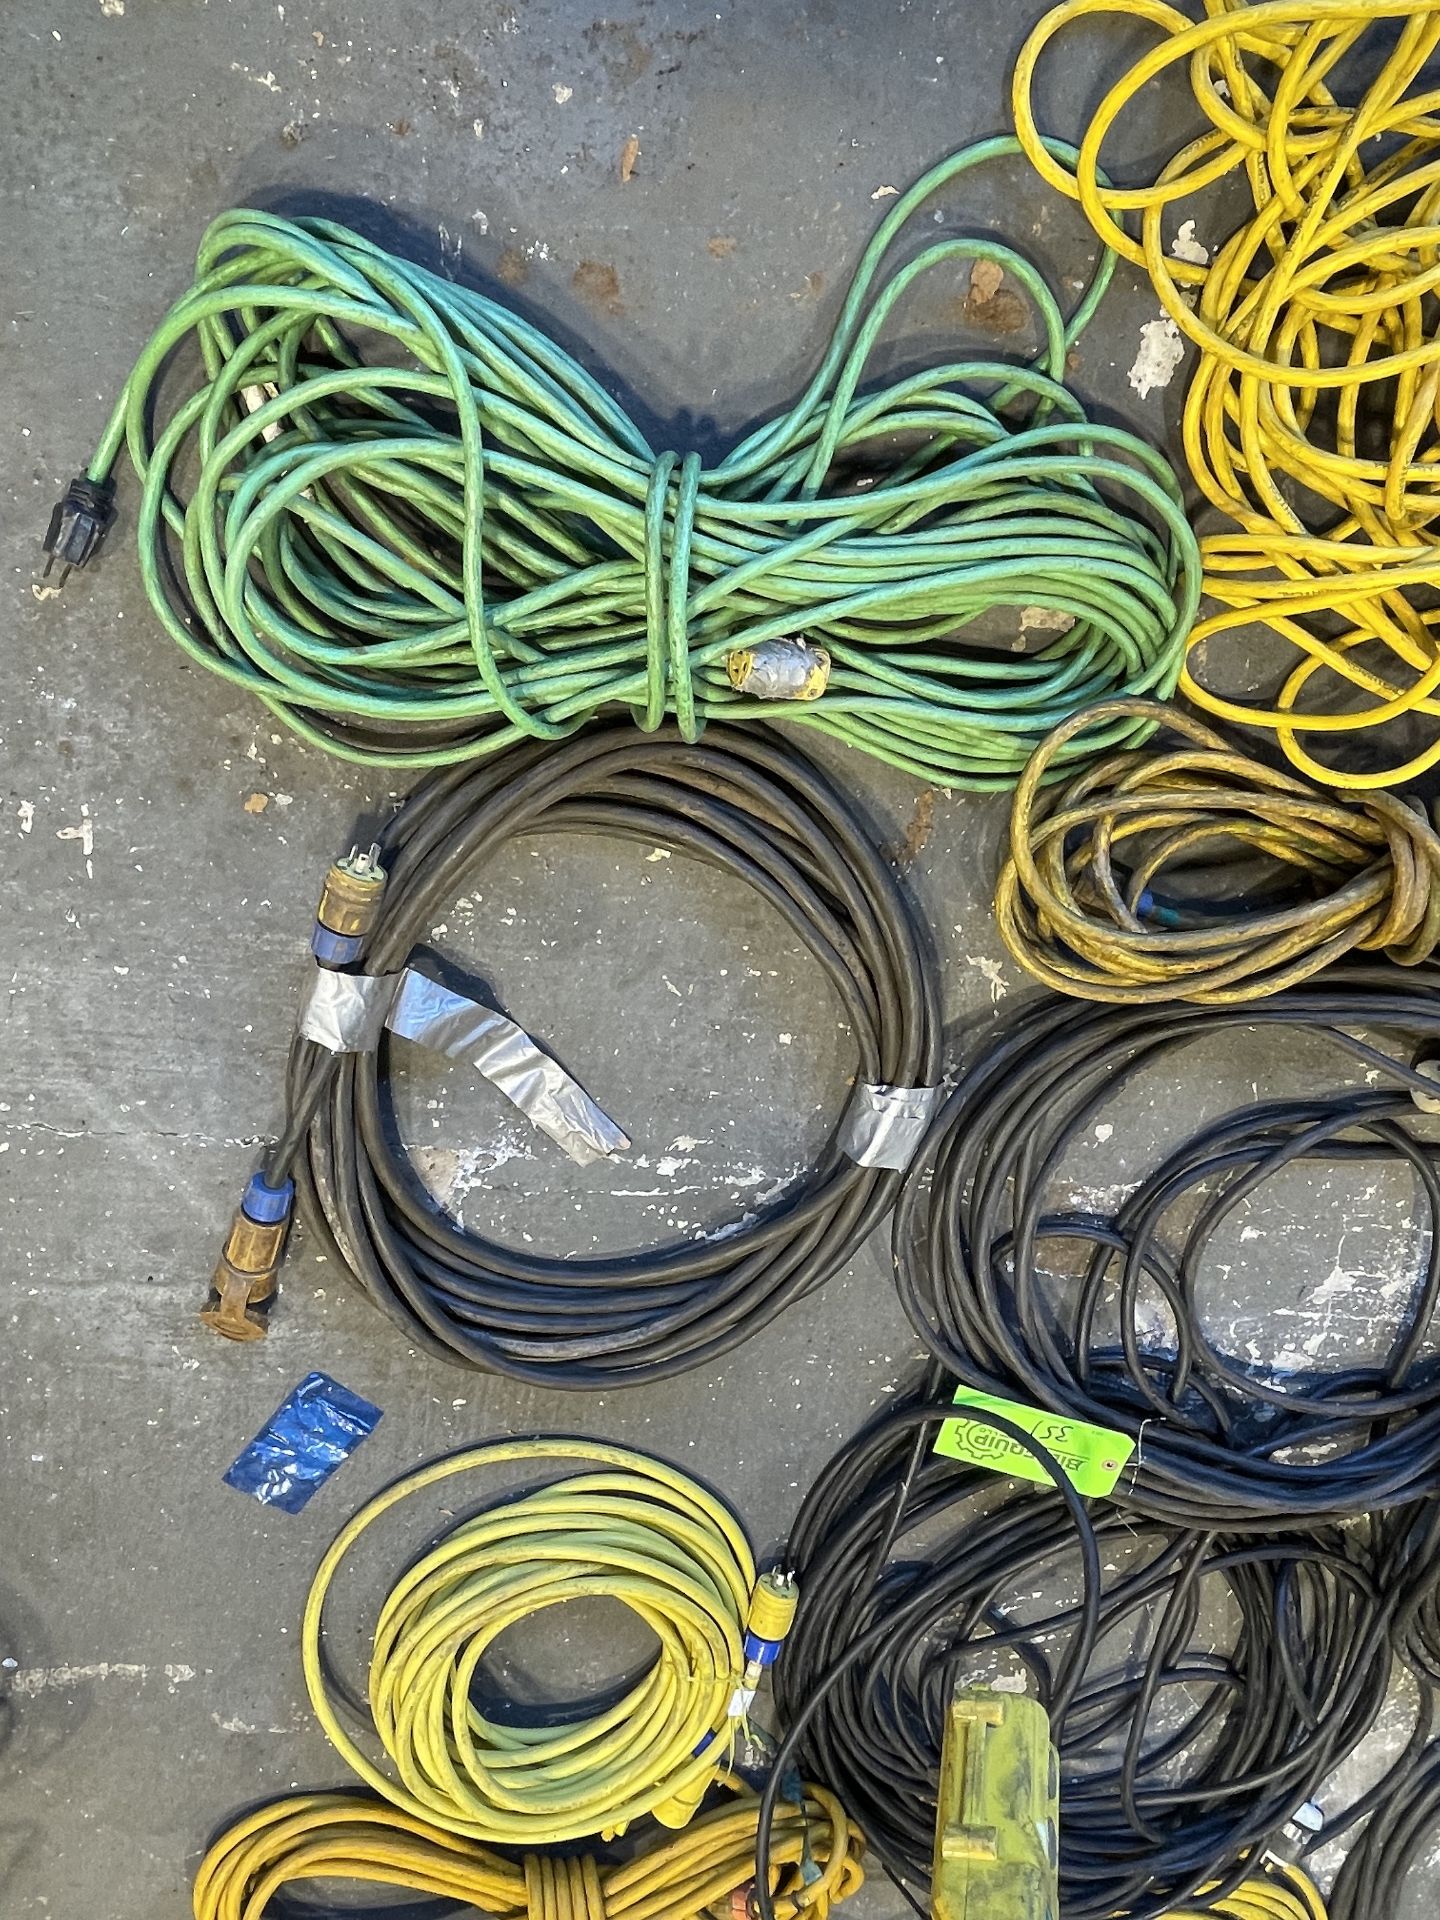 Lot of Extension Cords - Upland - Image 10 of 11